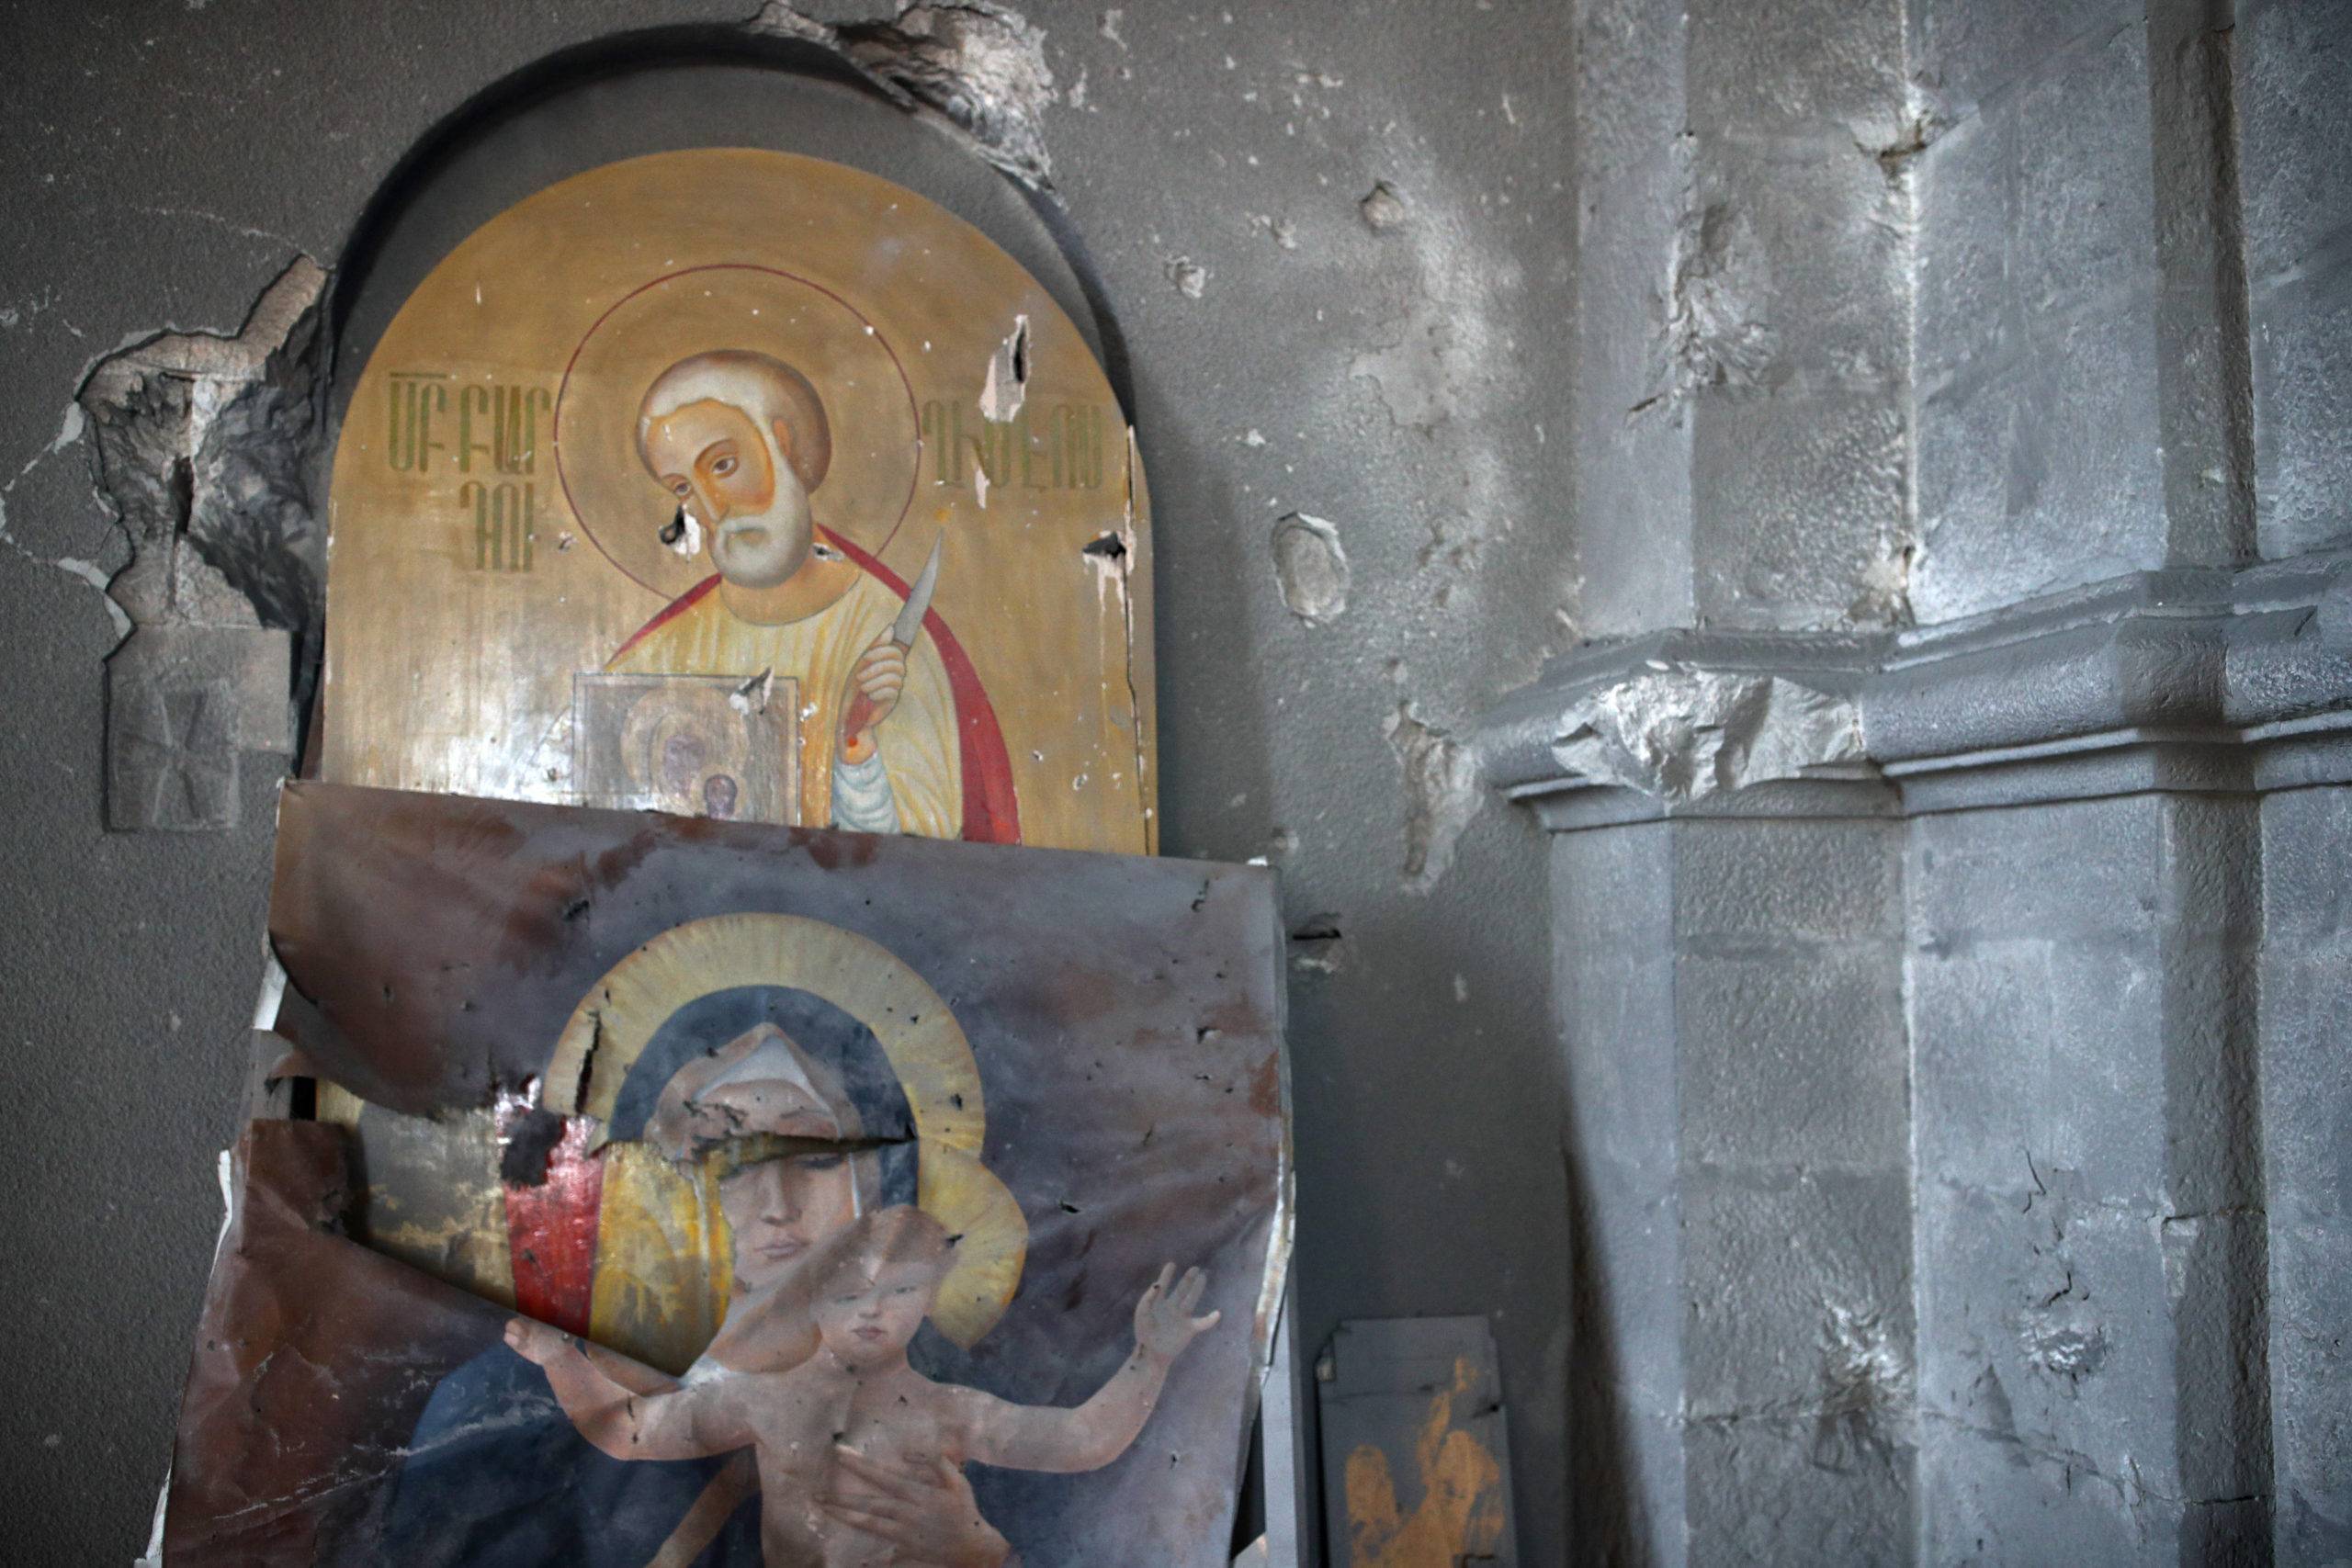 SHUSHA, NAGORNO-KARABAKH - OCTOBER 18, 2020: Icons at Holy Savior (Ghazanchetsots) Cathedral damaged in a rocket attack by the Azerbaijani Armed Forces. The fighting between Armenia and Azerbaijan over the disputed Caucasus Mountains territory of Nagorno-Karabakh resumed in late September. Both countries accused each other of provocation, declared martial law, and mobilized their armed forces. In the night of October 16, the capital city of Nagorno-Karabakh, Stepanakert, and the Azerbaijani city of Ganja underwent military attacks with multiple casualties and injuries reported from both sides. Sergei Bobylev/TASS/Sipa USA/31150712/YD/2010181801